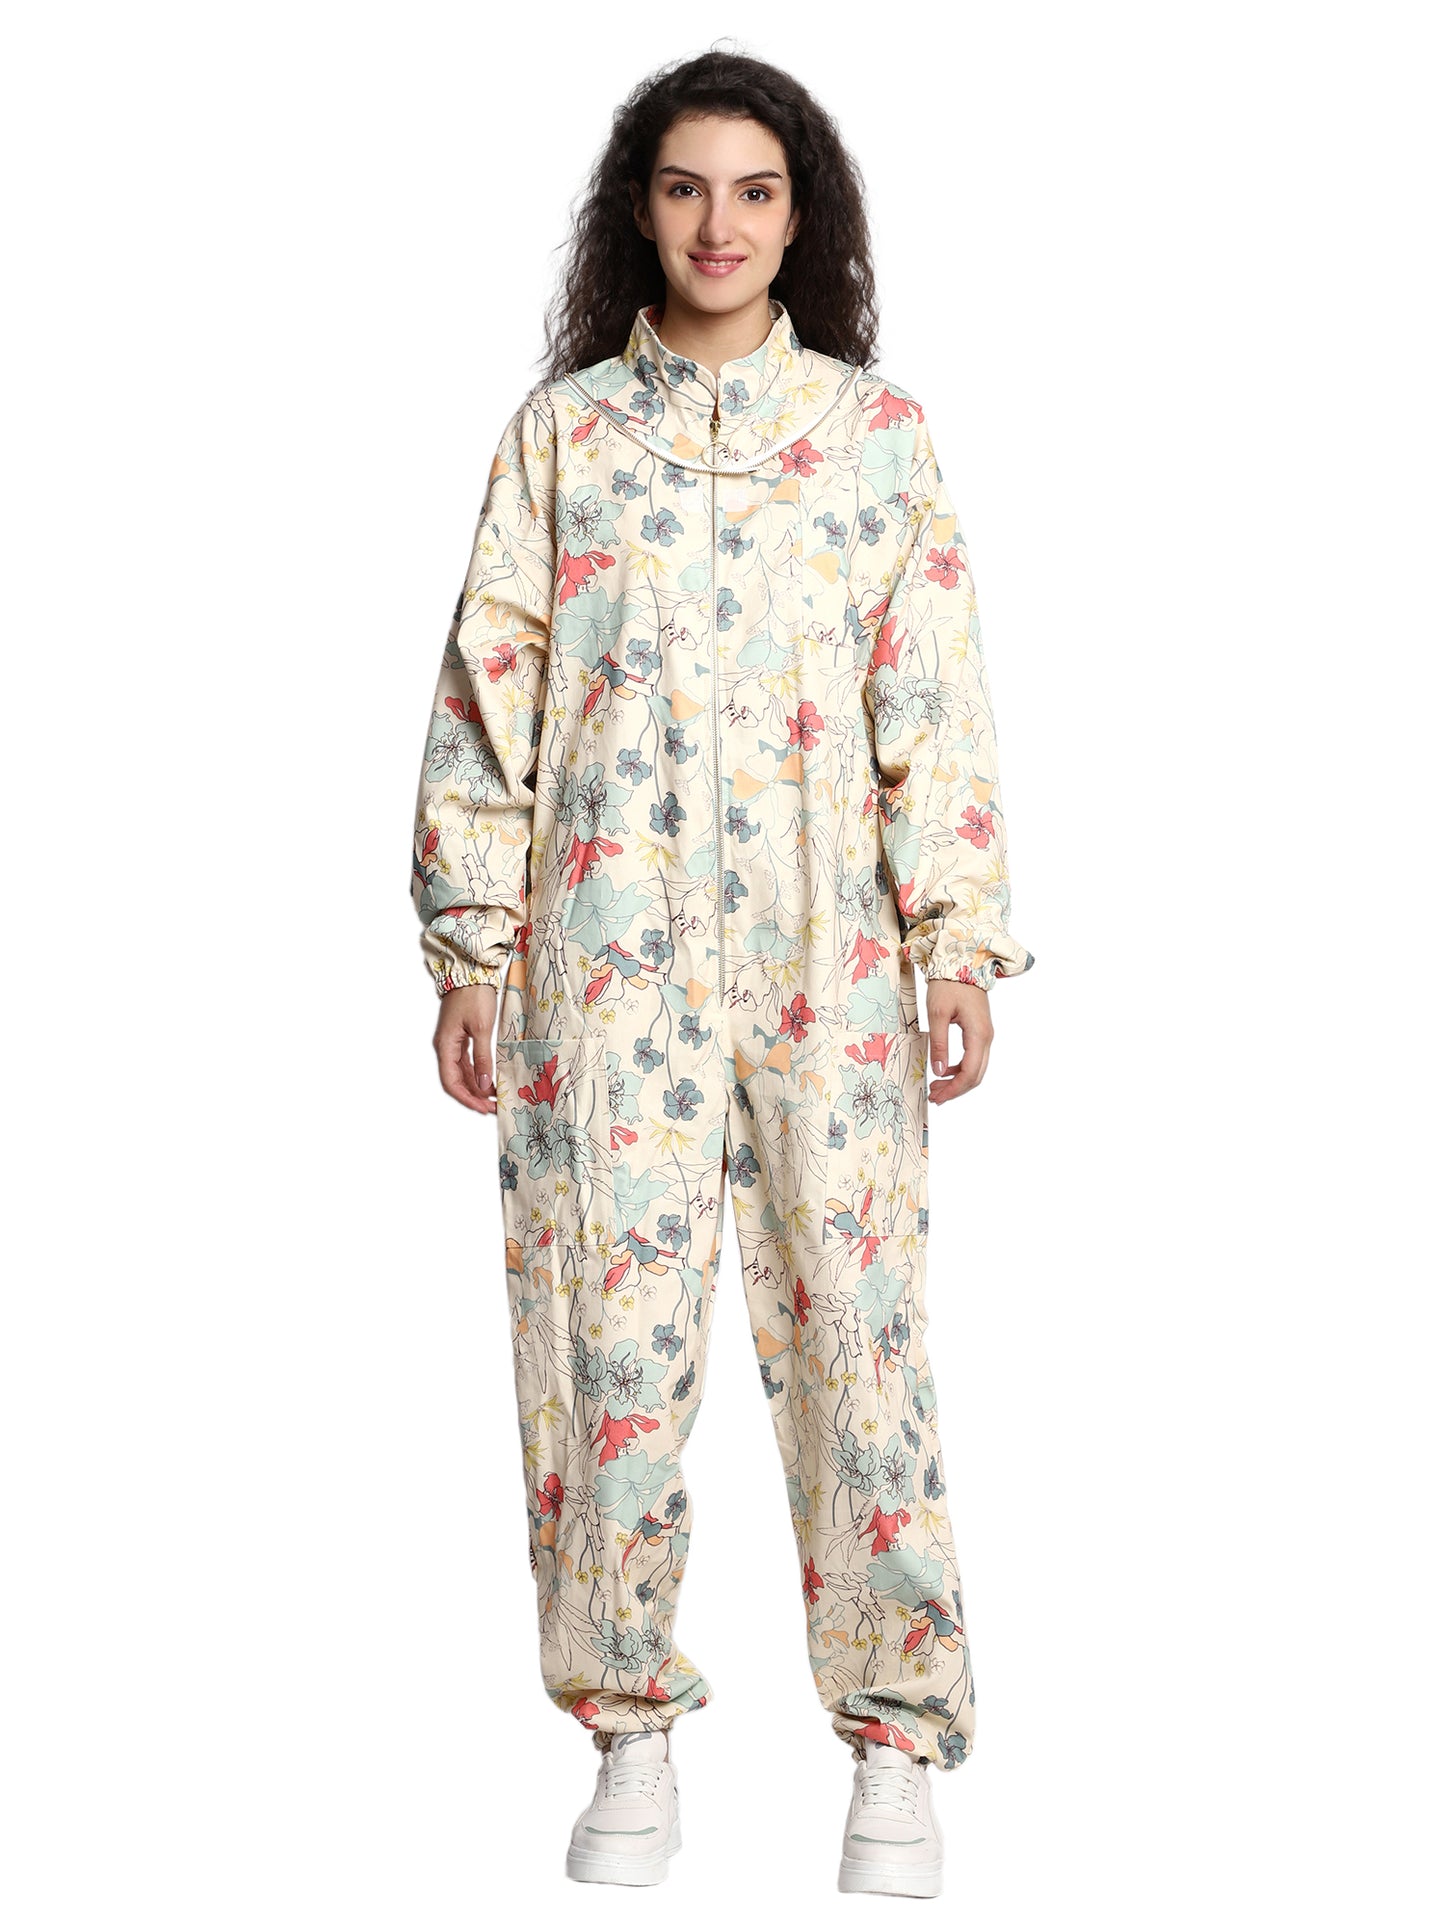 Beeattire Multicolor Flower Printed Cotton Bee Suit for Women with Round Hood